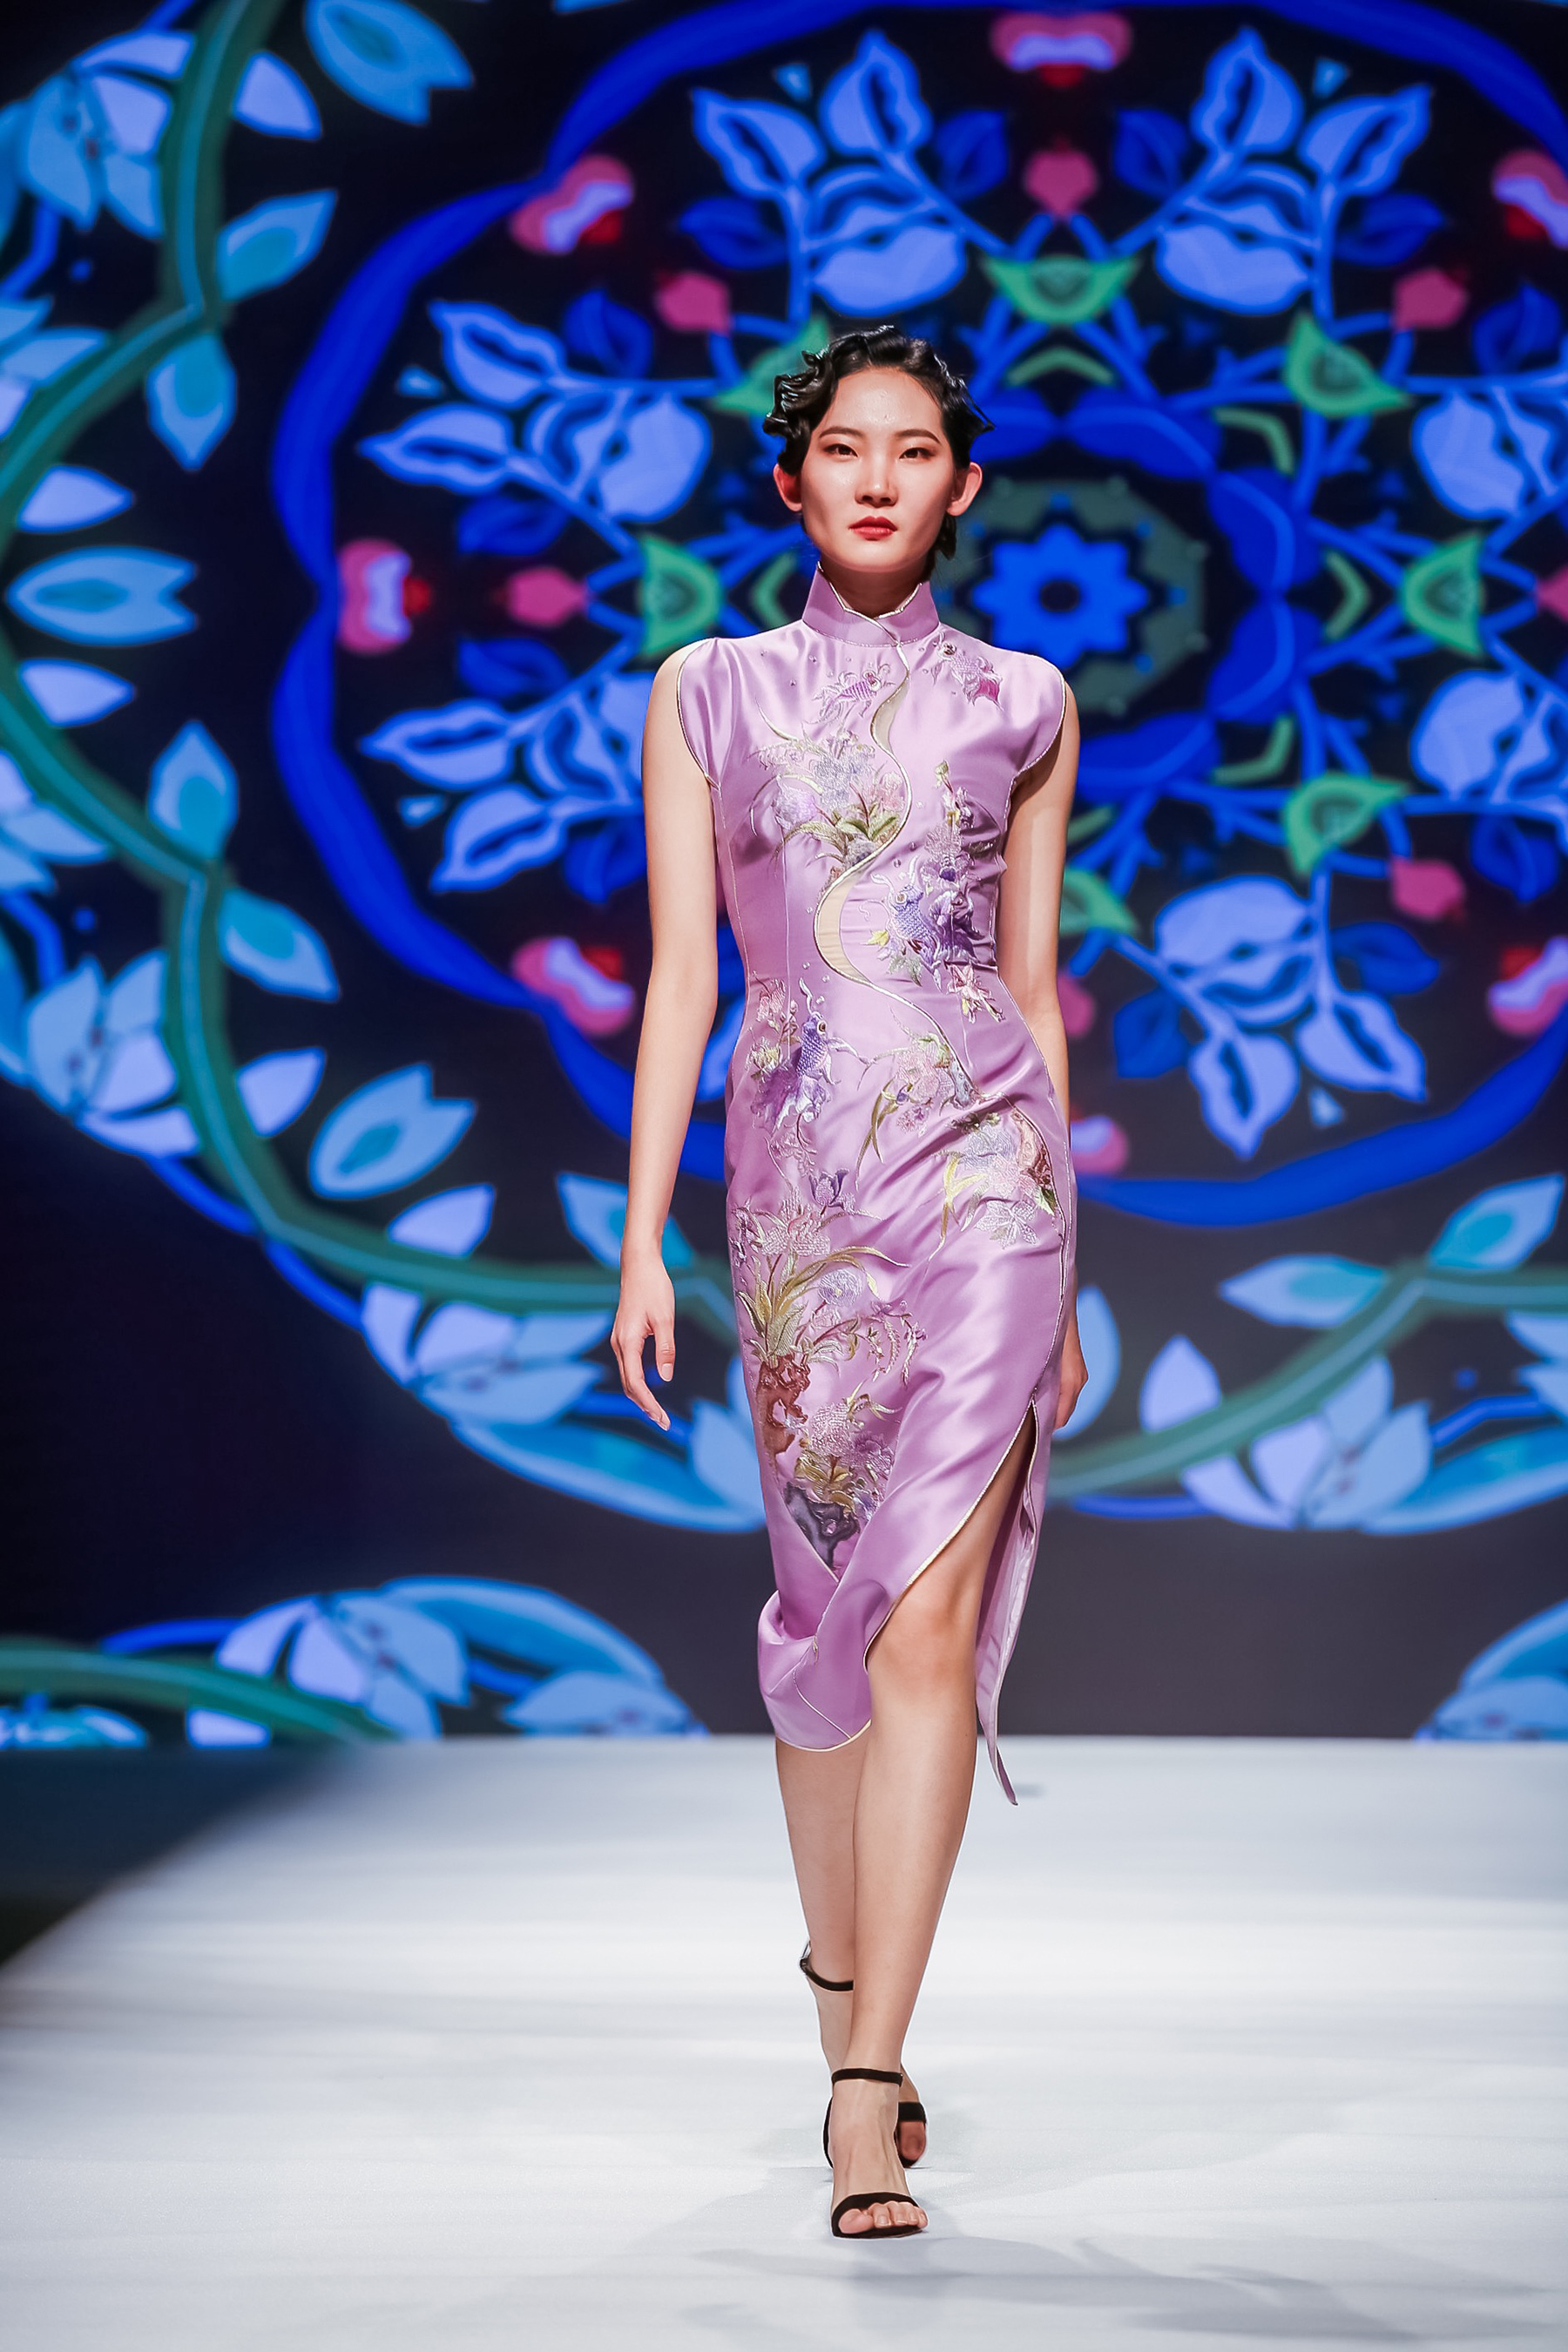 Intangible Cultural Heritage Qipao Show